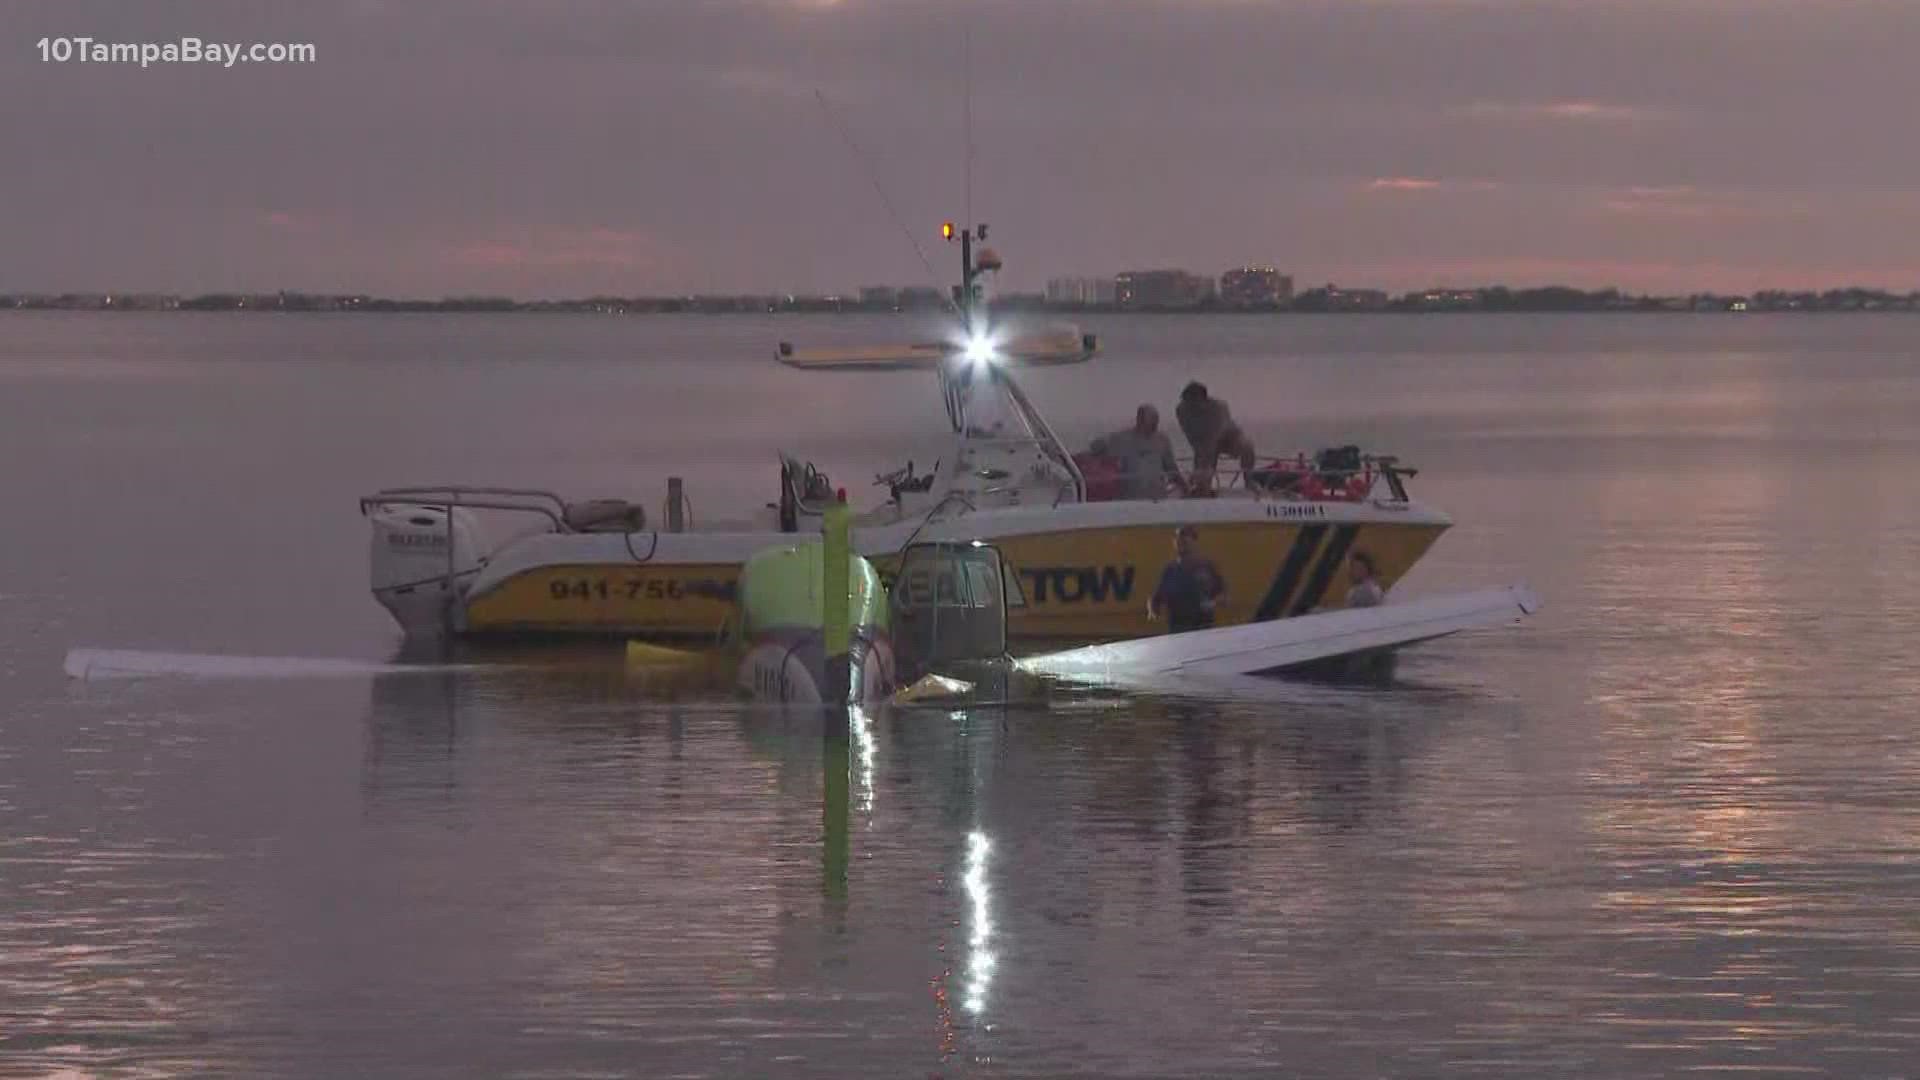 Nobody was hurt when a small plane went down Tuesday afternoon in Sarasota Bay.